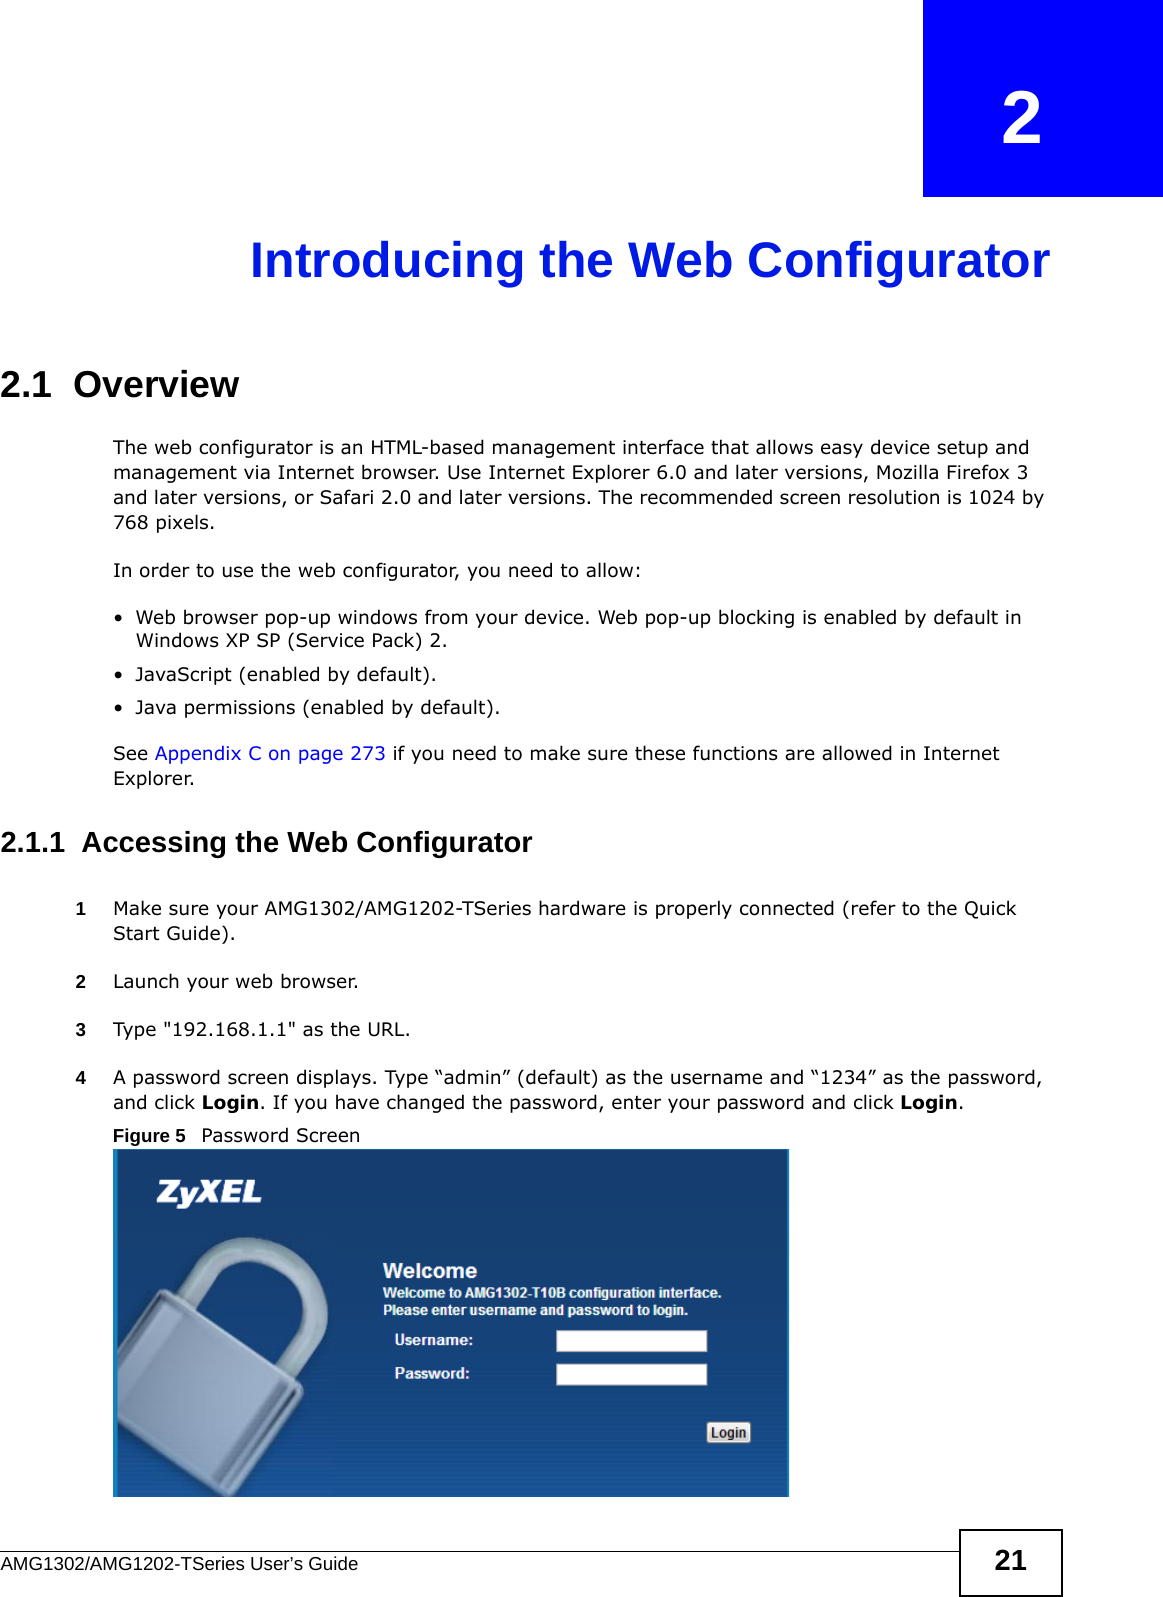 AMG1302/AMG1202-TSeries User’s Guide 21CHAPTER   2Introducing the Web Configurator2.1  OverviewThe web configurator is an HTML-based management interface that allows easy device setup and management via Internet browser. Use Internet Explorer 6.0 and later versions, Mozilla Firefox 3 and later versions, or Safari 2.0 and later versions. The recommended screen resolution is 1024 by 768 pixels.In order to use the web configurator, you need to allow:• Web browser pop-up windows from your device. Web pop-up blocking is enabled by default in Windows XP SP (Service Pack) 2.• JavaScript (enabled by default).• Java permissions (enabled by default).See Appendix C on page 273 if you need to make sure these functions are allowed in Internet Explorer.2.1.1  Accessing the Web Configurator1Make sure your AMG1302/AMG1202-TSeries hardware is properly connected (refer to the Quick Start Guide).2Launch your web browser.3Type &quot;192.168.1.1&quot; as the URL.4A password screen displays. Type “admin” (default) as the username and “1234” as the password, and click Login. If you have changed the password, enter your password and click Login. Figure 5   Password Screen